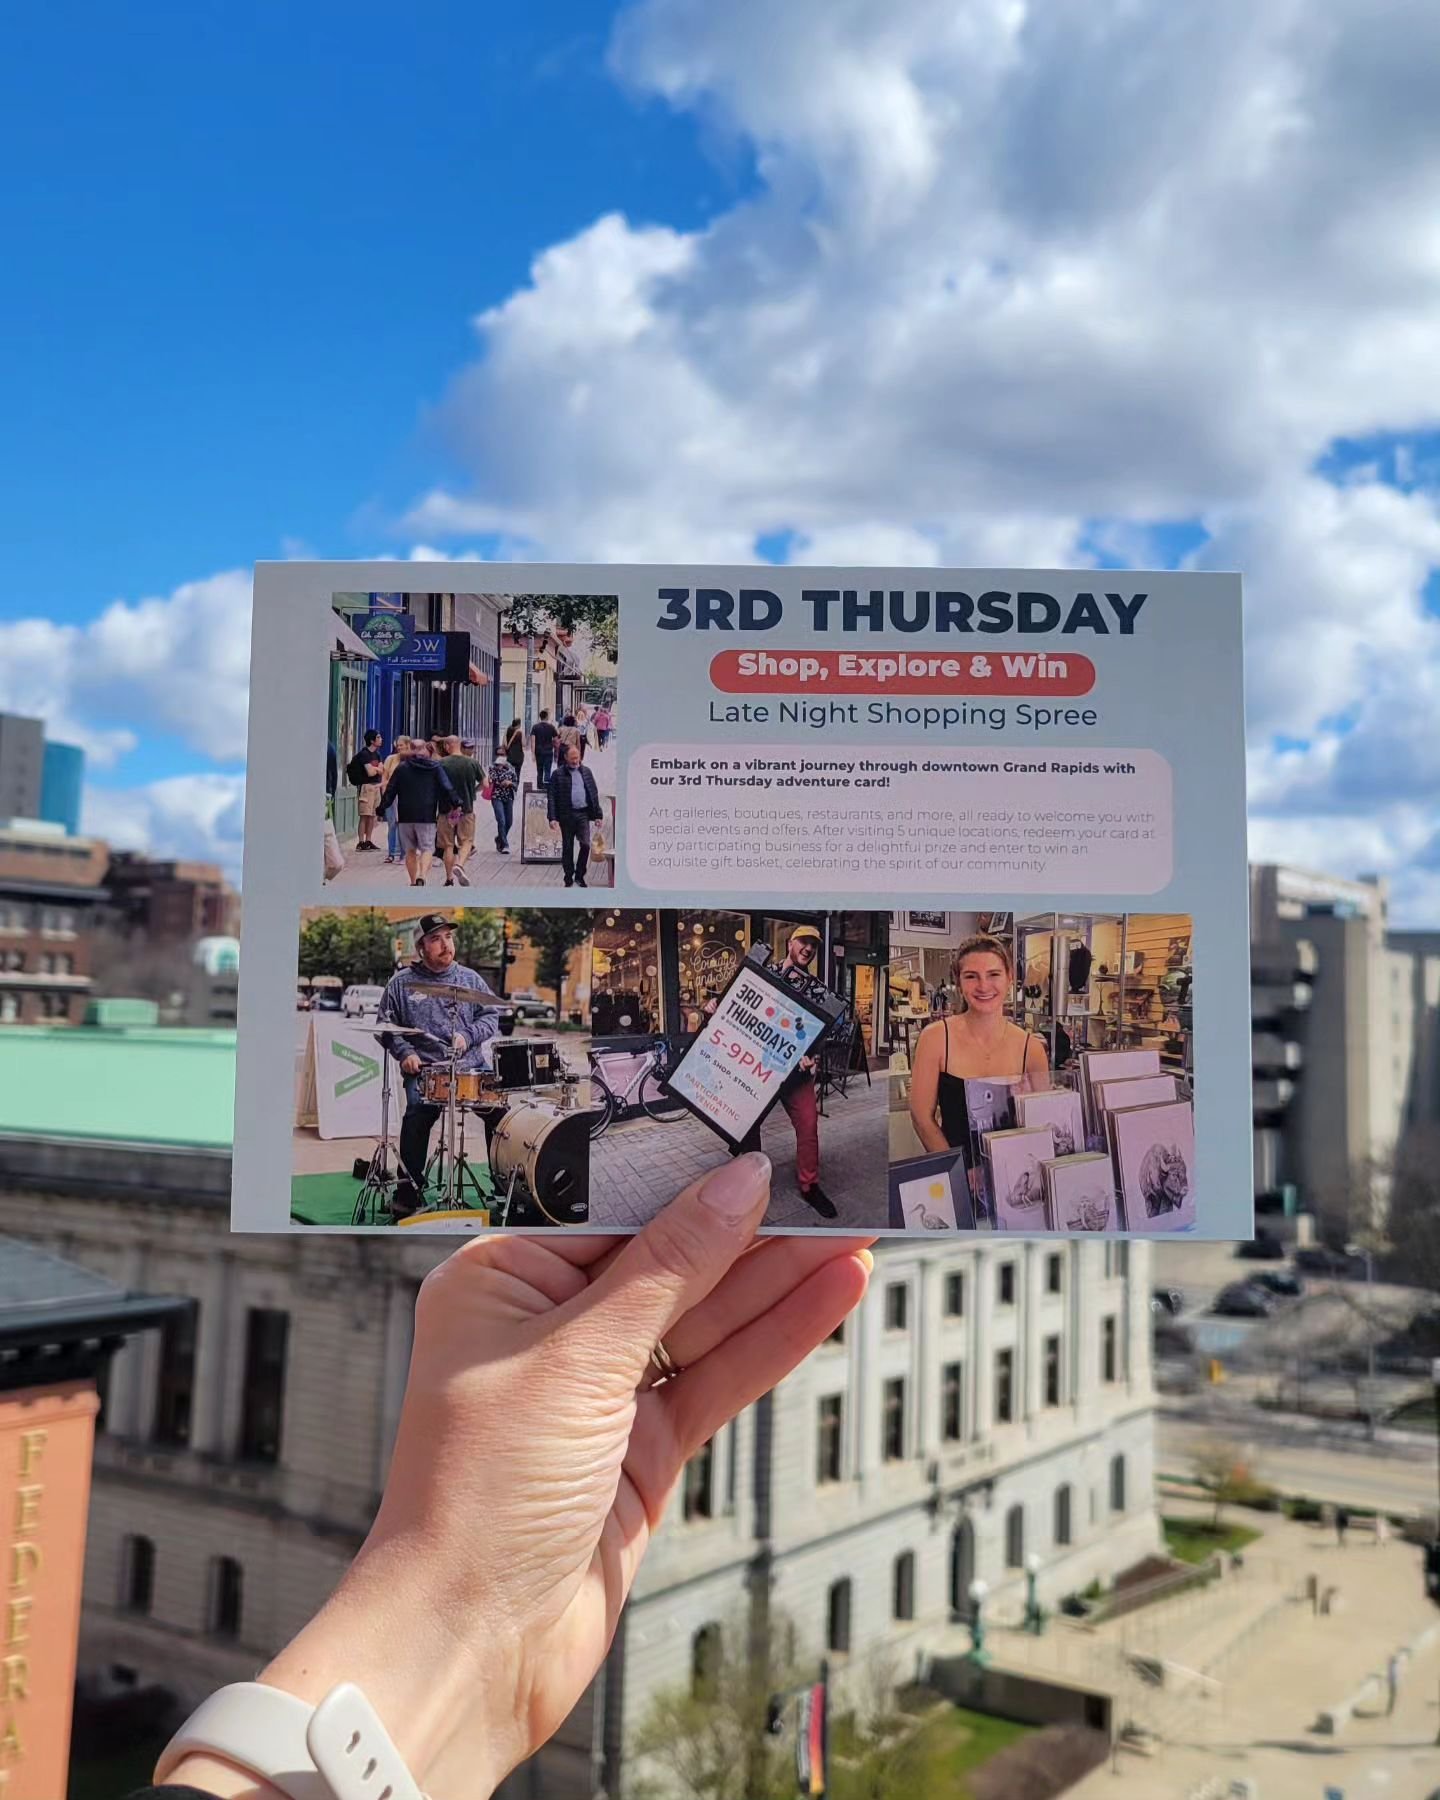 Embark on a vibrant journey through downtown Grand Rapids with our new 3rd Thursday adventure card! Art galleries, boutiques, restaurants, and more are all ready to welcome you with special events and offers. After visiting 5 unique locations, redeem